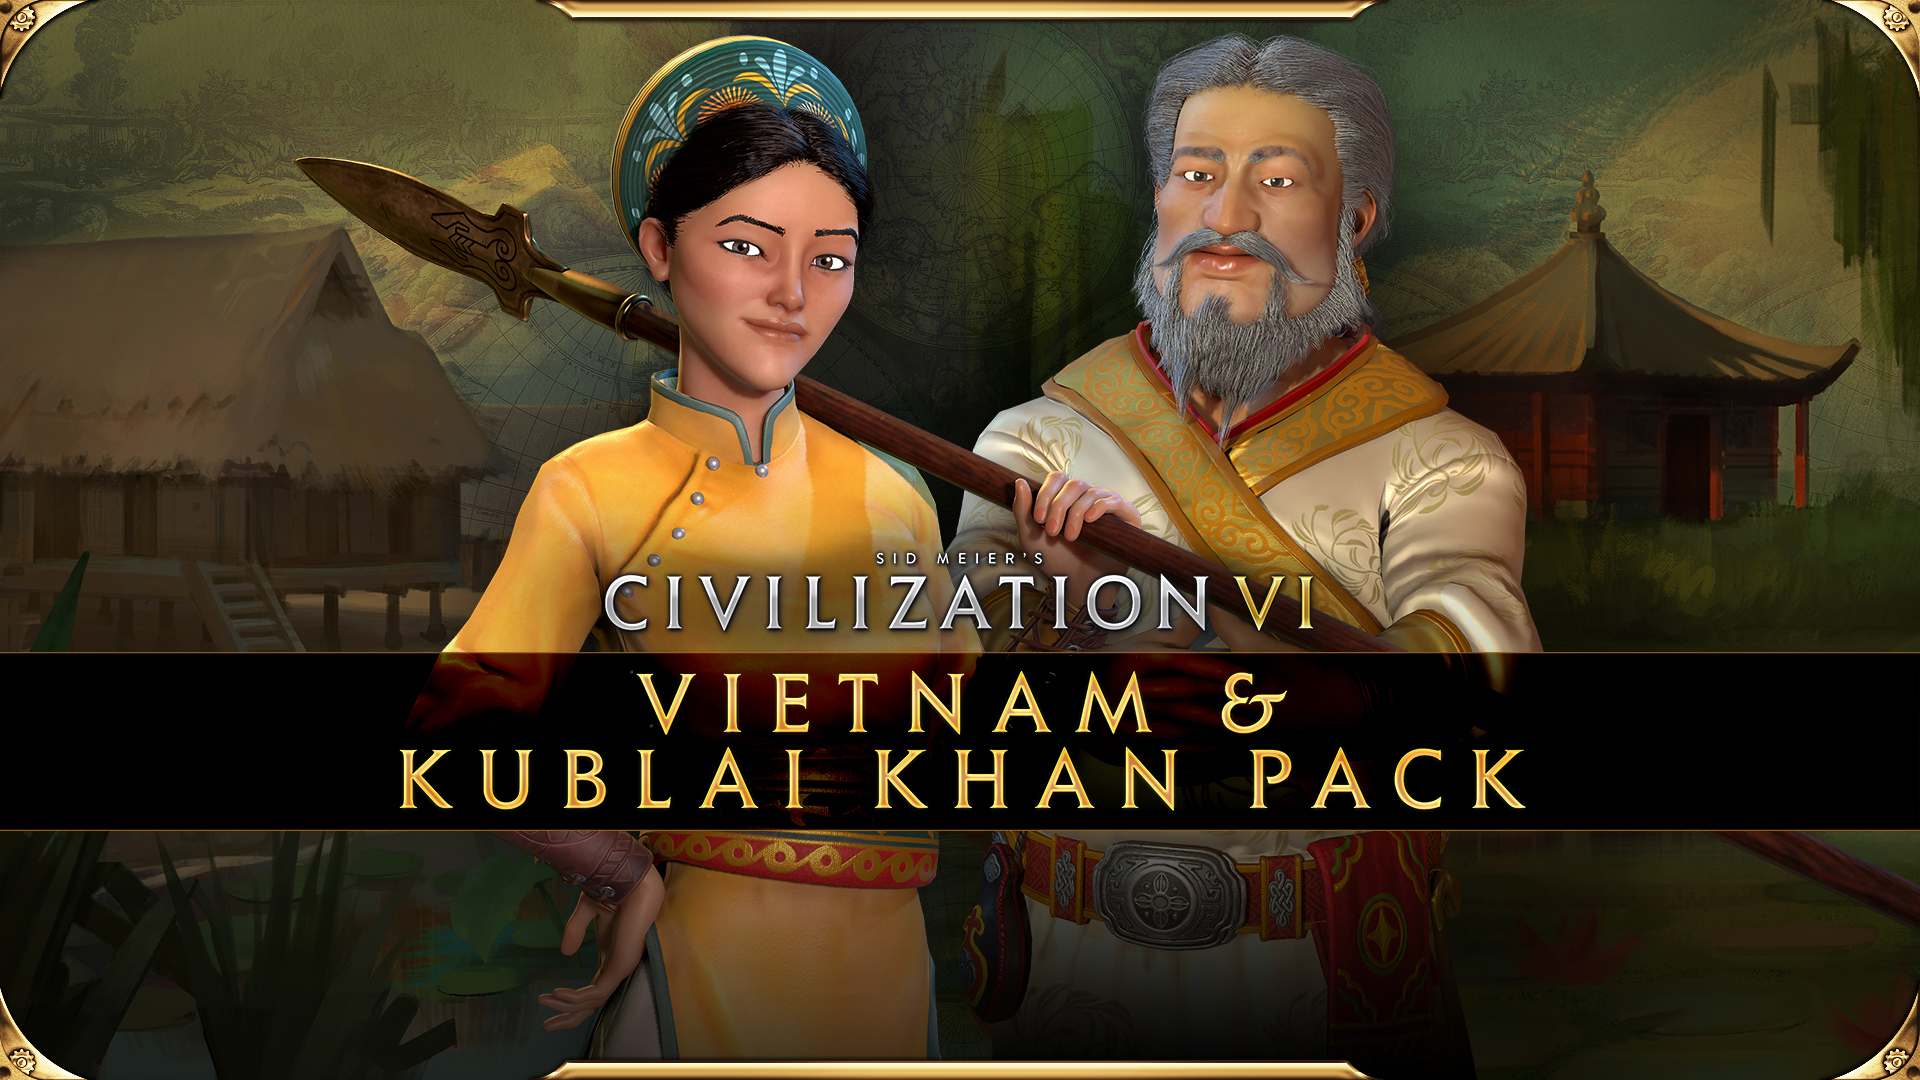 civilization 5 fountain of youth